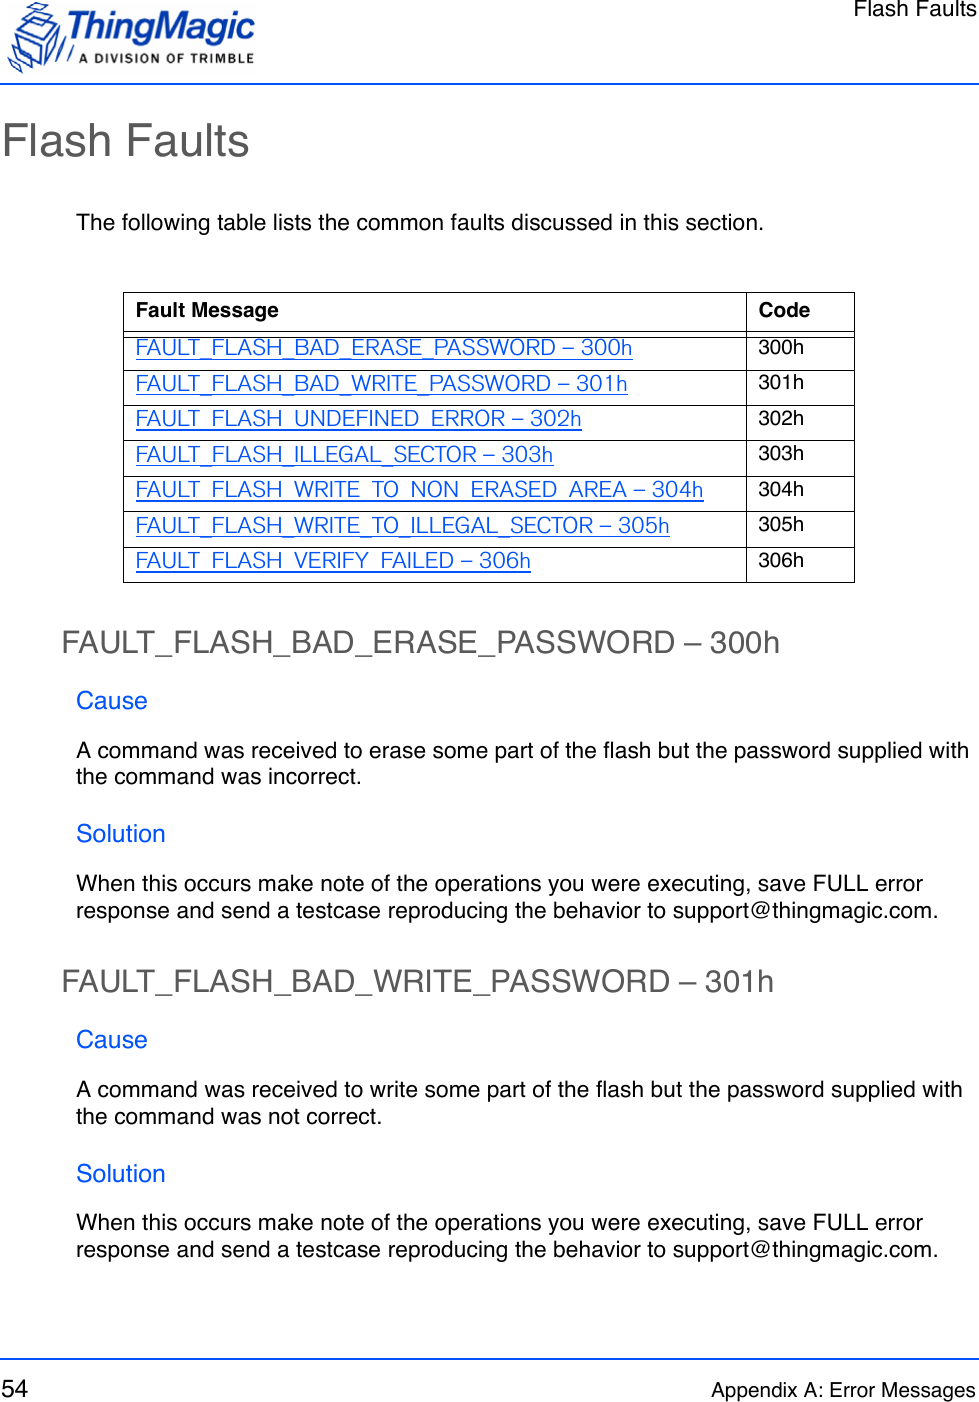 Flash Faults54 Appendix A: Error MessagesFlash FaultsThe following table lists the common faults discussed in this section.FAULT_FLASH_BAD_ERASE_PASSWORD – 300hCauseA command was received to erase some part of the flash but the password supplied with the command was incorrect.SolutionWhen this occurs make note of the operations you were executing, save FULL error response and send a testcase reproducing the behavior to support@thingmagic.com.FAULT_FLASH_BAD_WRITE_PASSWORD – 301hCauseA command was received to write some part of the flash but the password supplied with the command was not correct.SolutionWhen this occurs make note of the operations you were executing, save FULL error response and send a testcase reproducing the behavior to support@thingmagic.com.Fault Message CodeFAULT_FLASH_BAD_ERASE_PASSWORD – 300h 300hFAULT_FLASH_BAD_WRITE_PASSWORD – 301h 301hFAULT_FLASH_UNDEFINED_ERROR – 302h 302hFAULT_FLASH_ILLEGAL_SECTOR – 303h 303hFAULT_FLASH_WRITE_TO_NON_ERASED_AREA – 304h 304hFAULT_FLASH_WRITE_TO_ILLEGAL_SECTOR – 305h 305hFAULT_FLASH_VERIFY_FAILED – 306h 306h